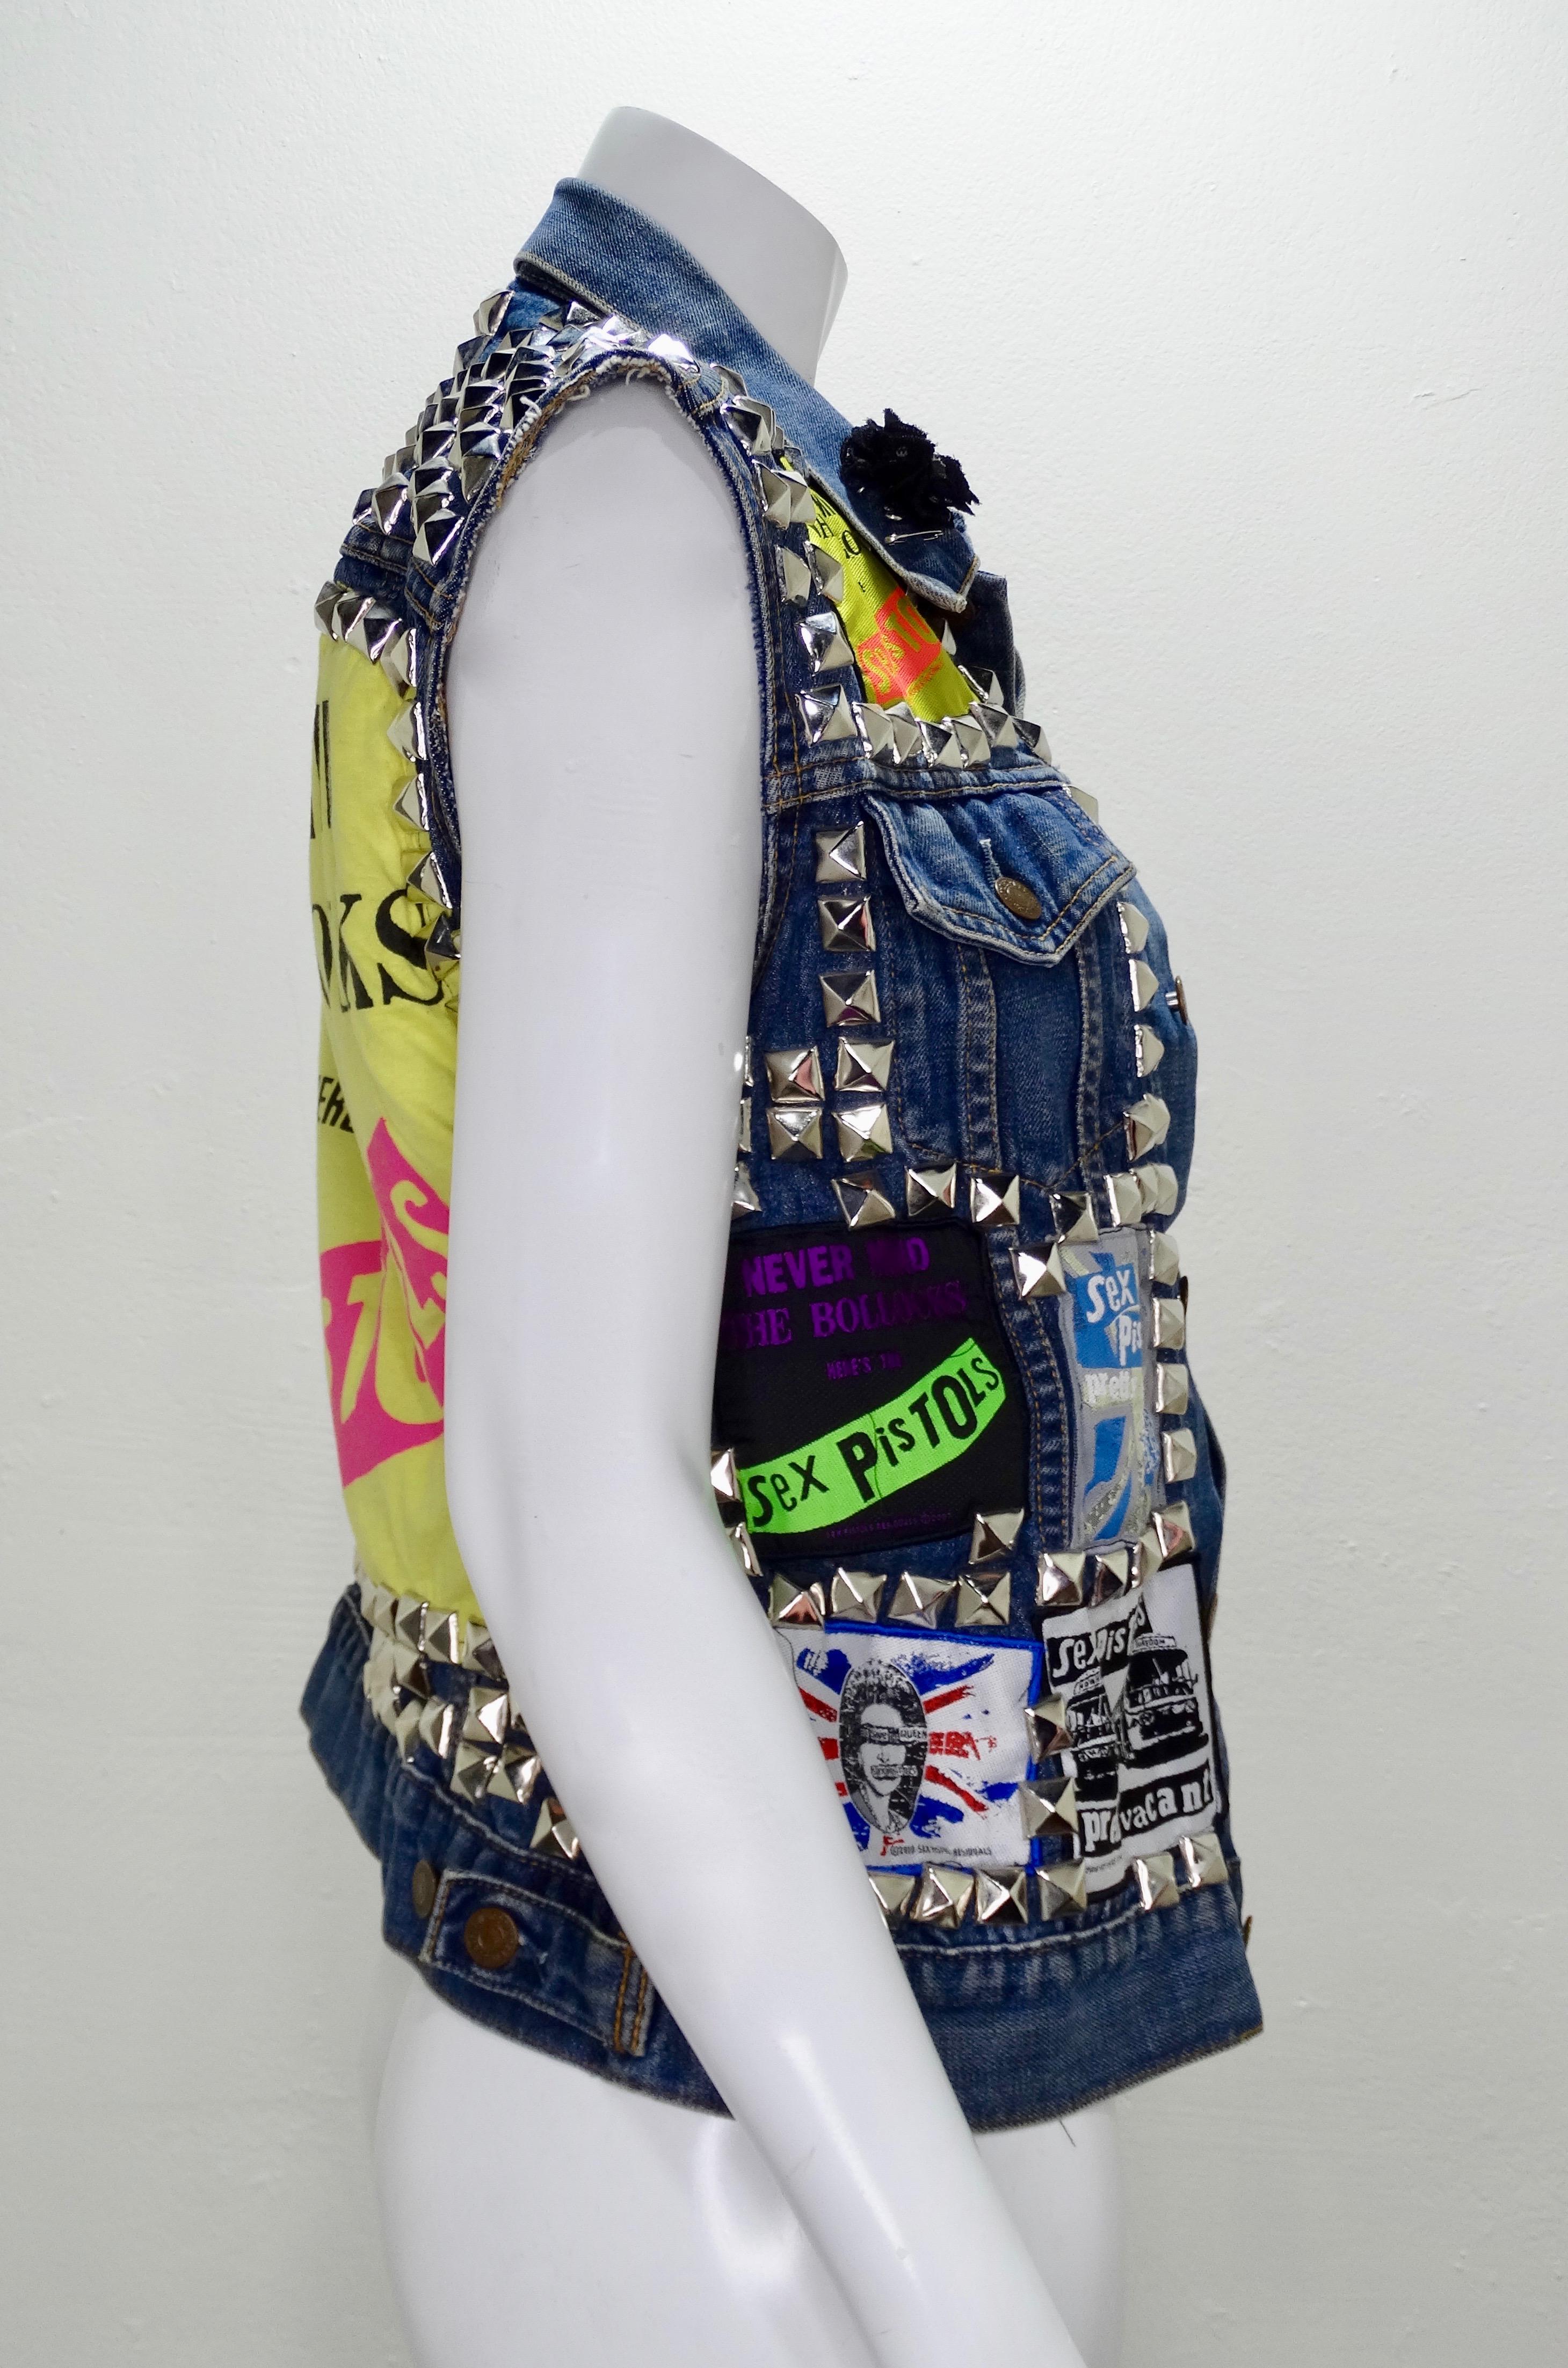 Add a little steampunk to your look with this amazing Levi's vest! An original Levi Strauss & Co. denim vest from the 1970s/1980s embellished with a variety of Sex Pistols patches (circa 2007-2010), silver studs, and safety pins. Perfect to layer